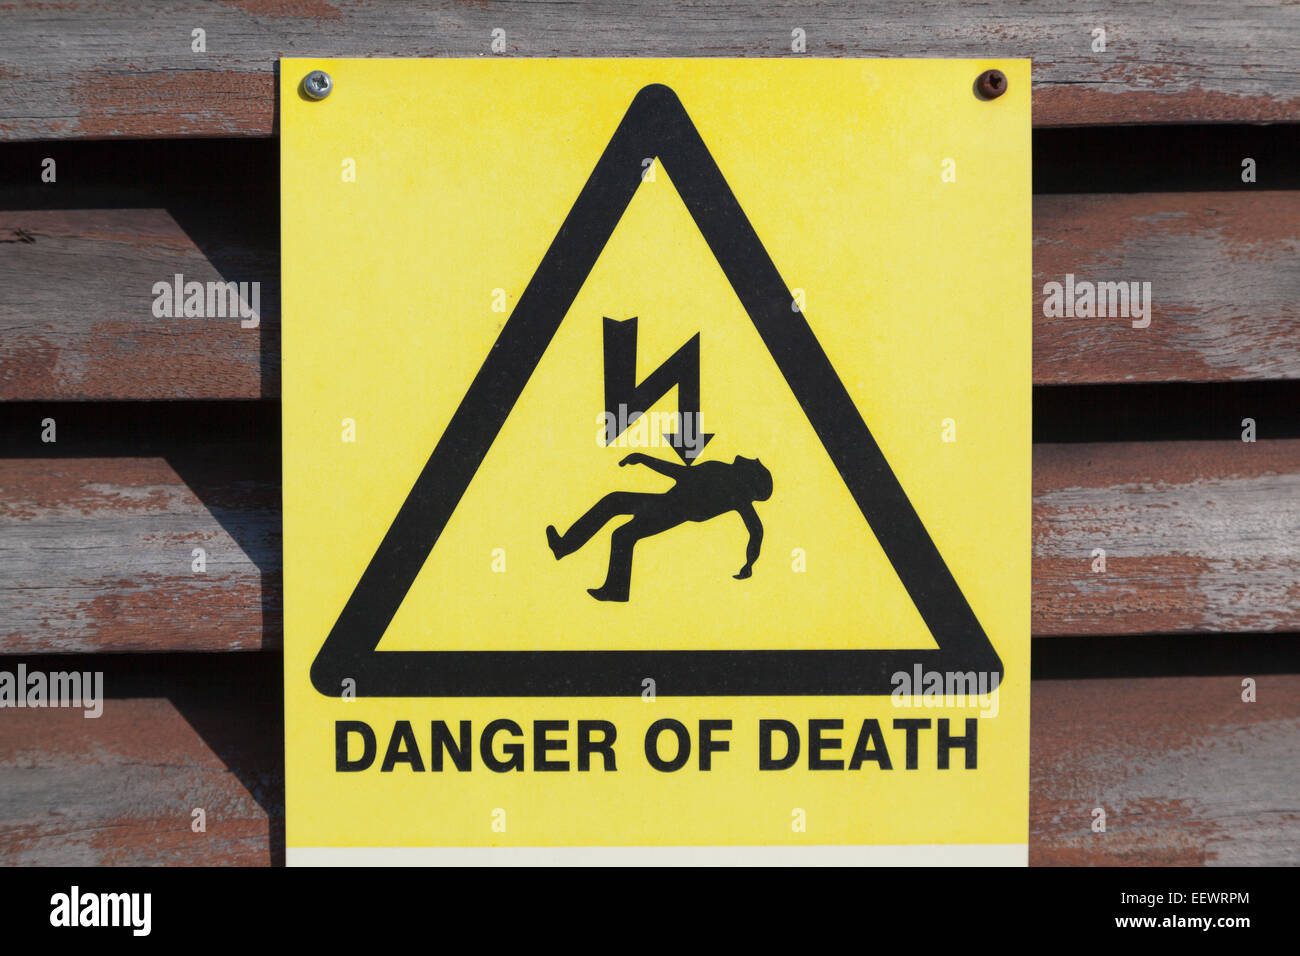 Danger of Death sign. Stock Photo